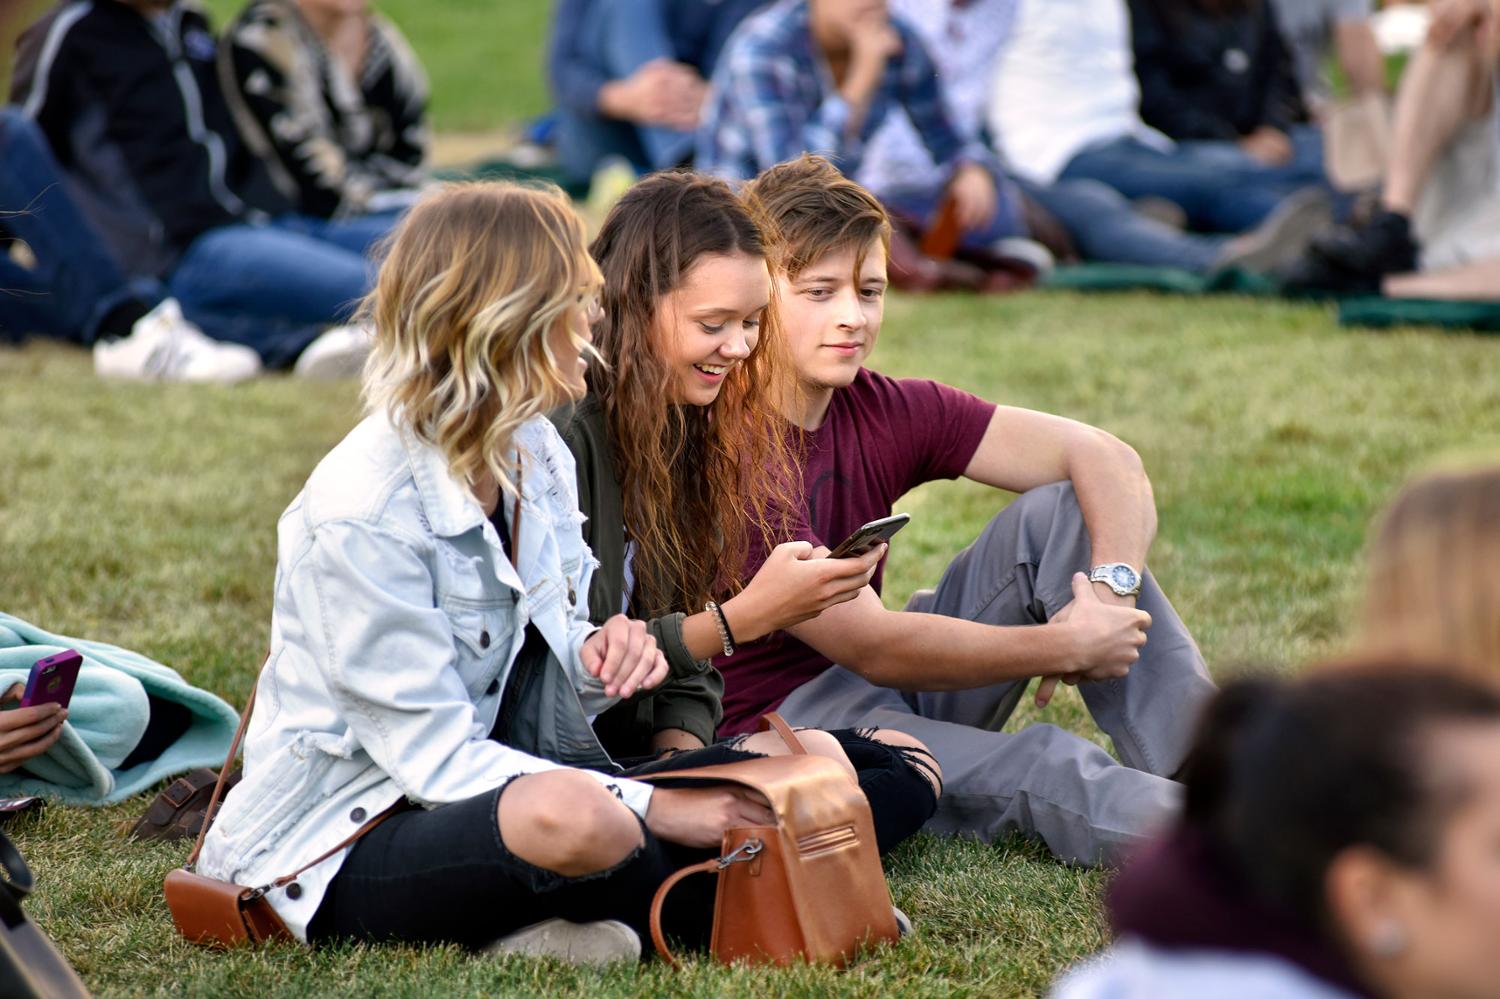 Students sitting on grass.